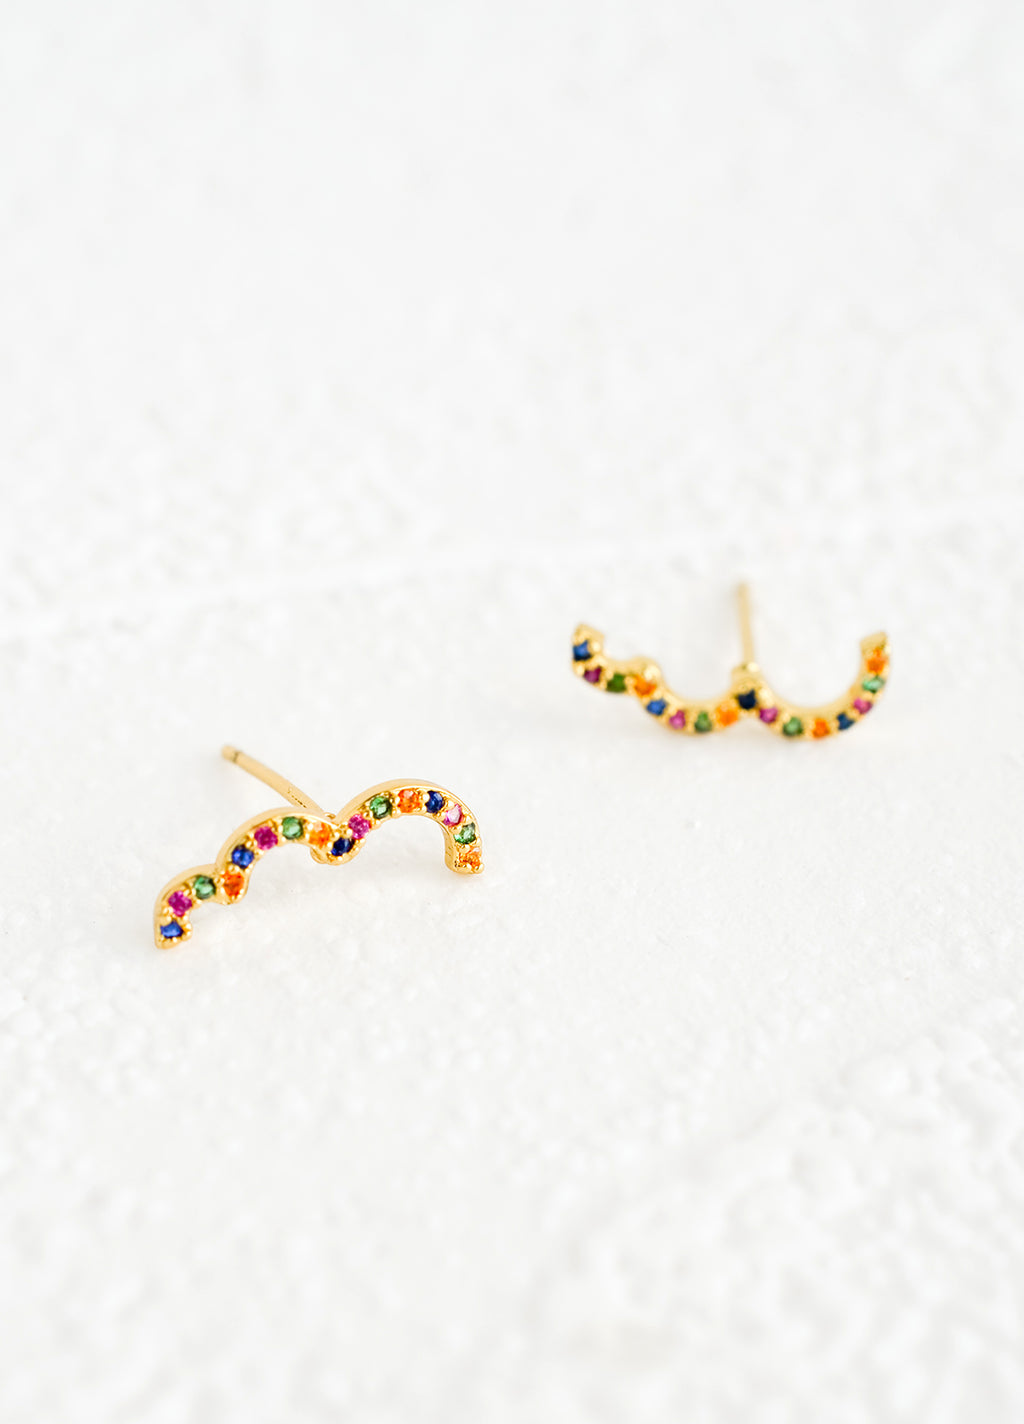 1: A pair of gold stud earrings in squiggly, half cloud-like shape with multicolor crystal detailing.